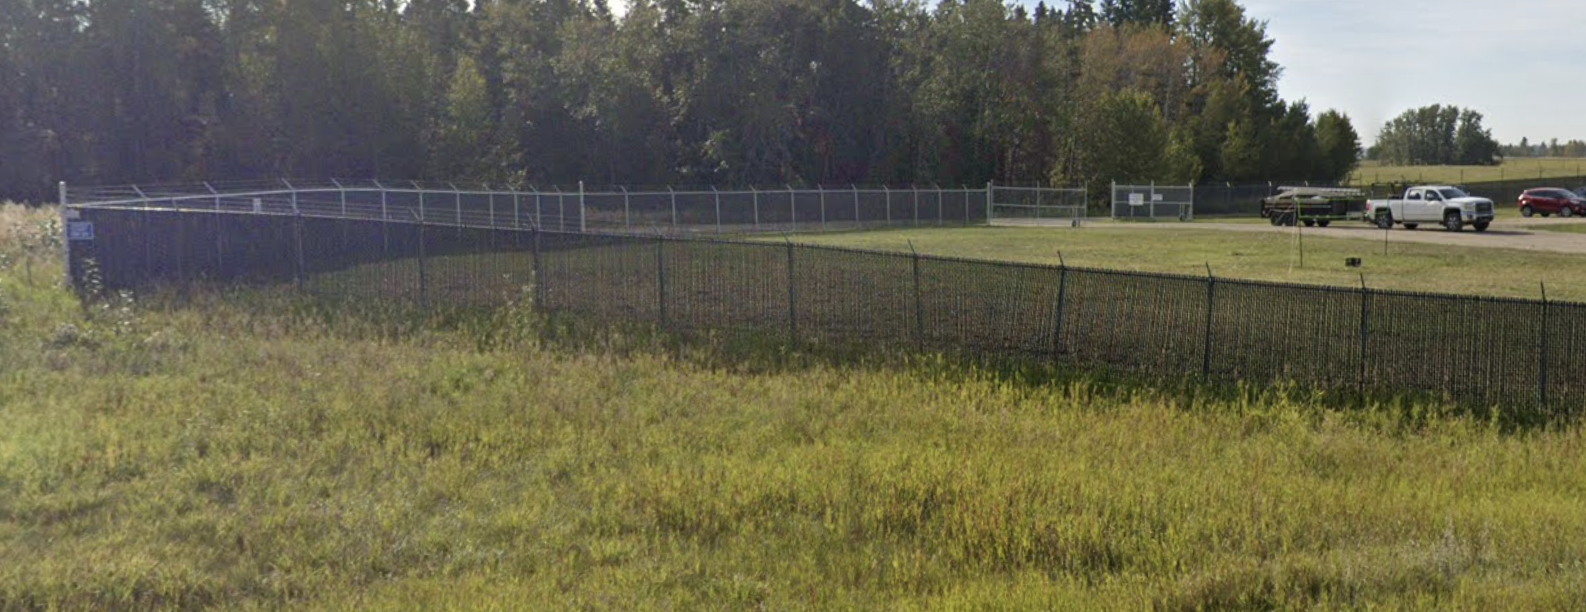 Security fencing around a grassy area with a security gate visible in the background.